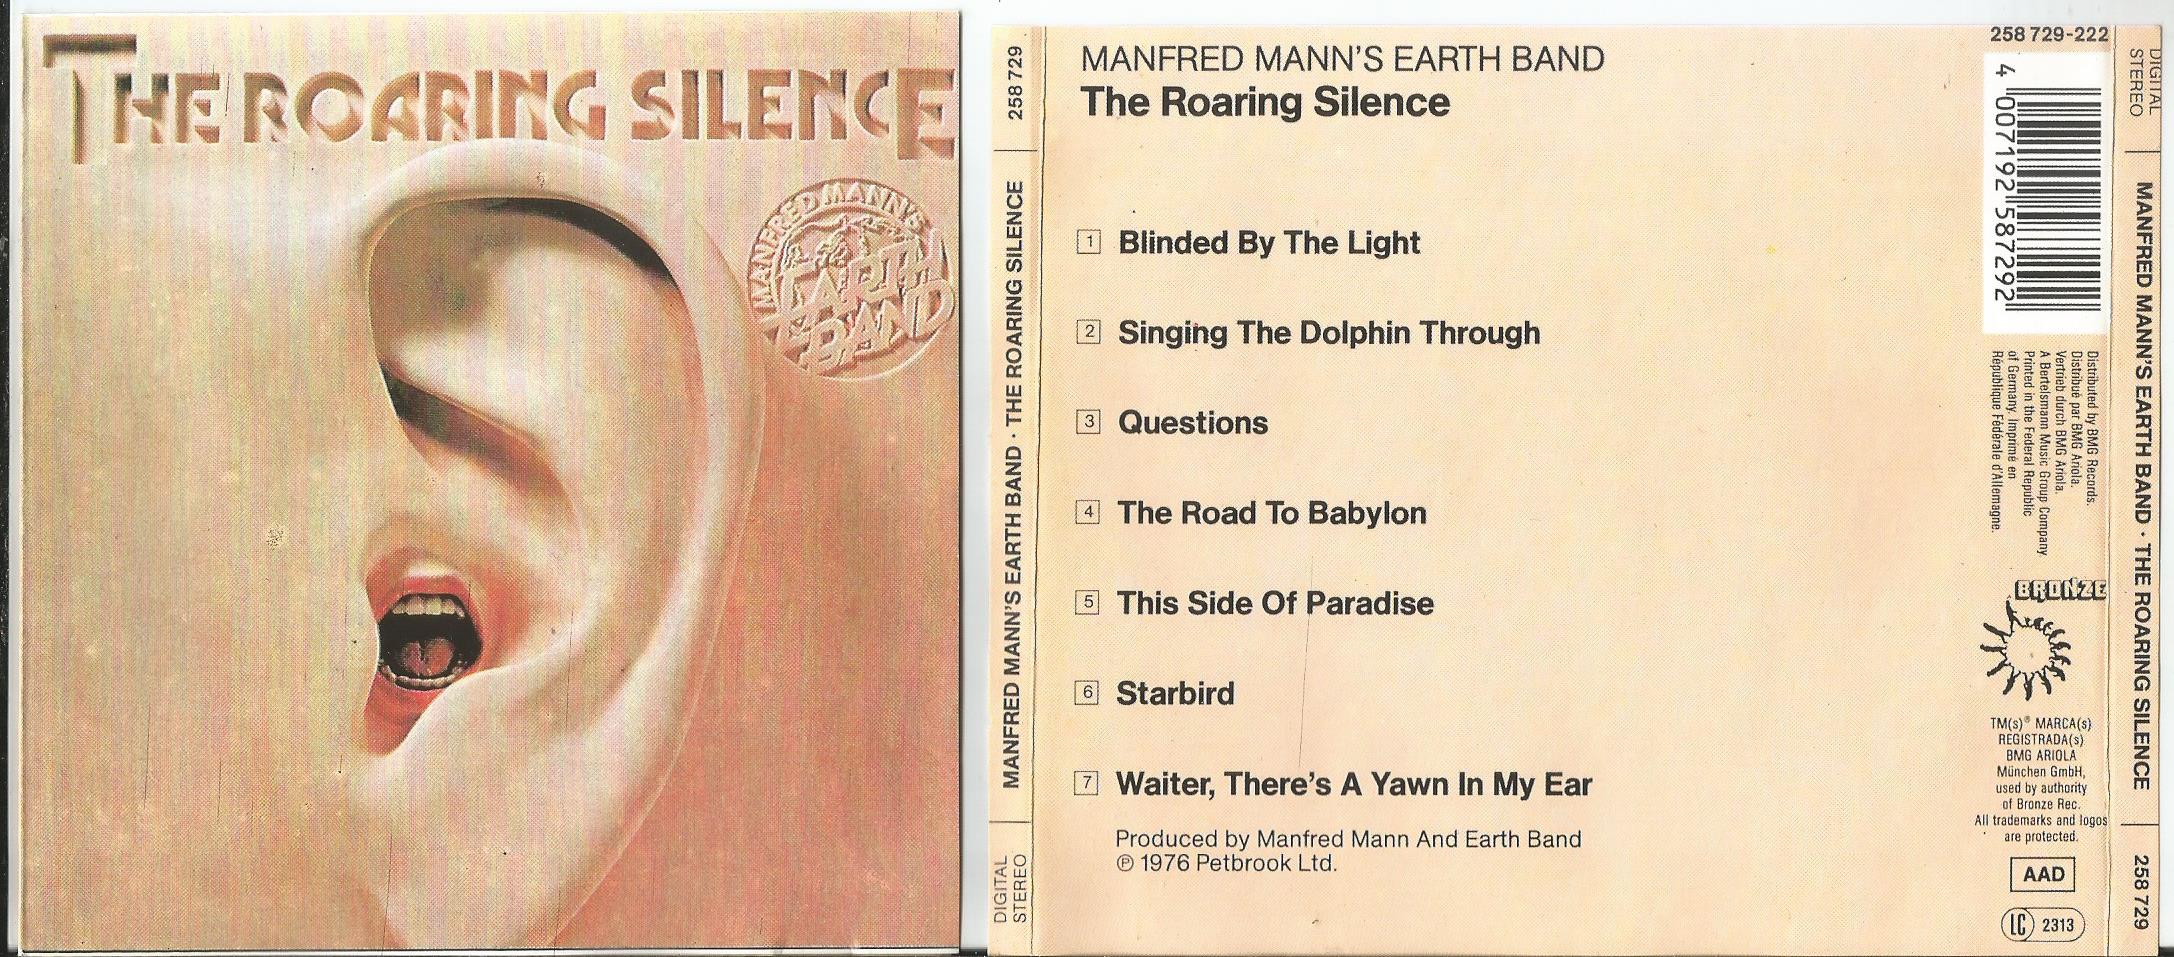 Manfred Mann's Earth Band - This Side Of Paradise Lyrics